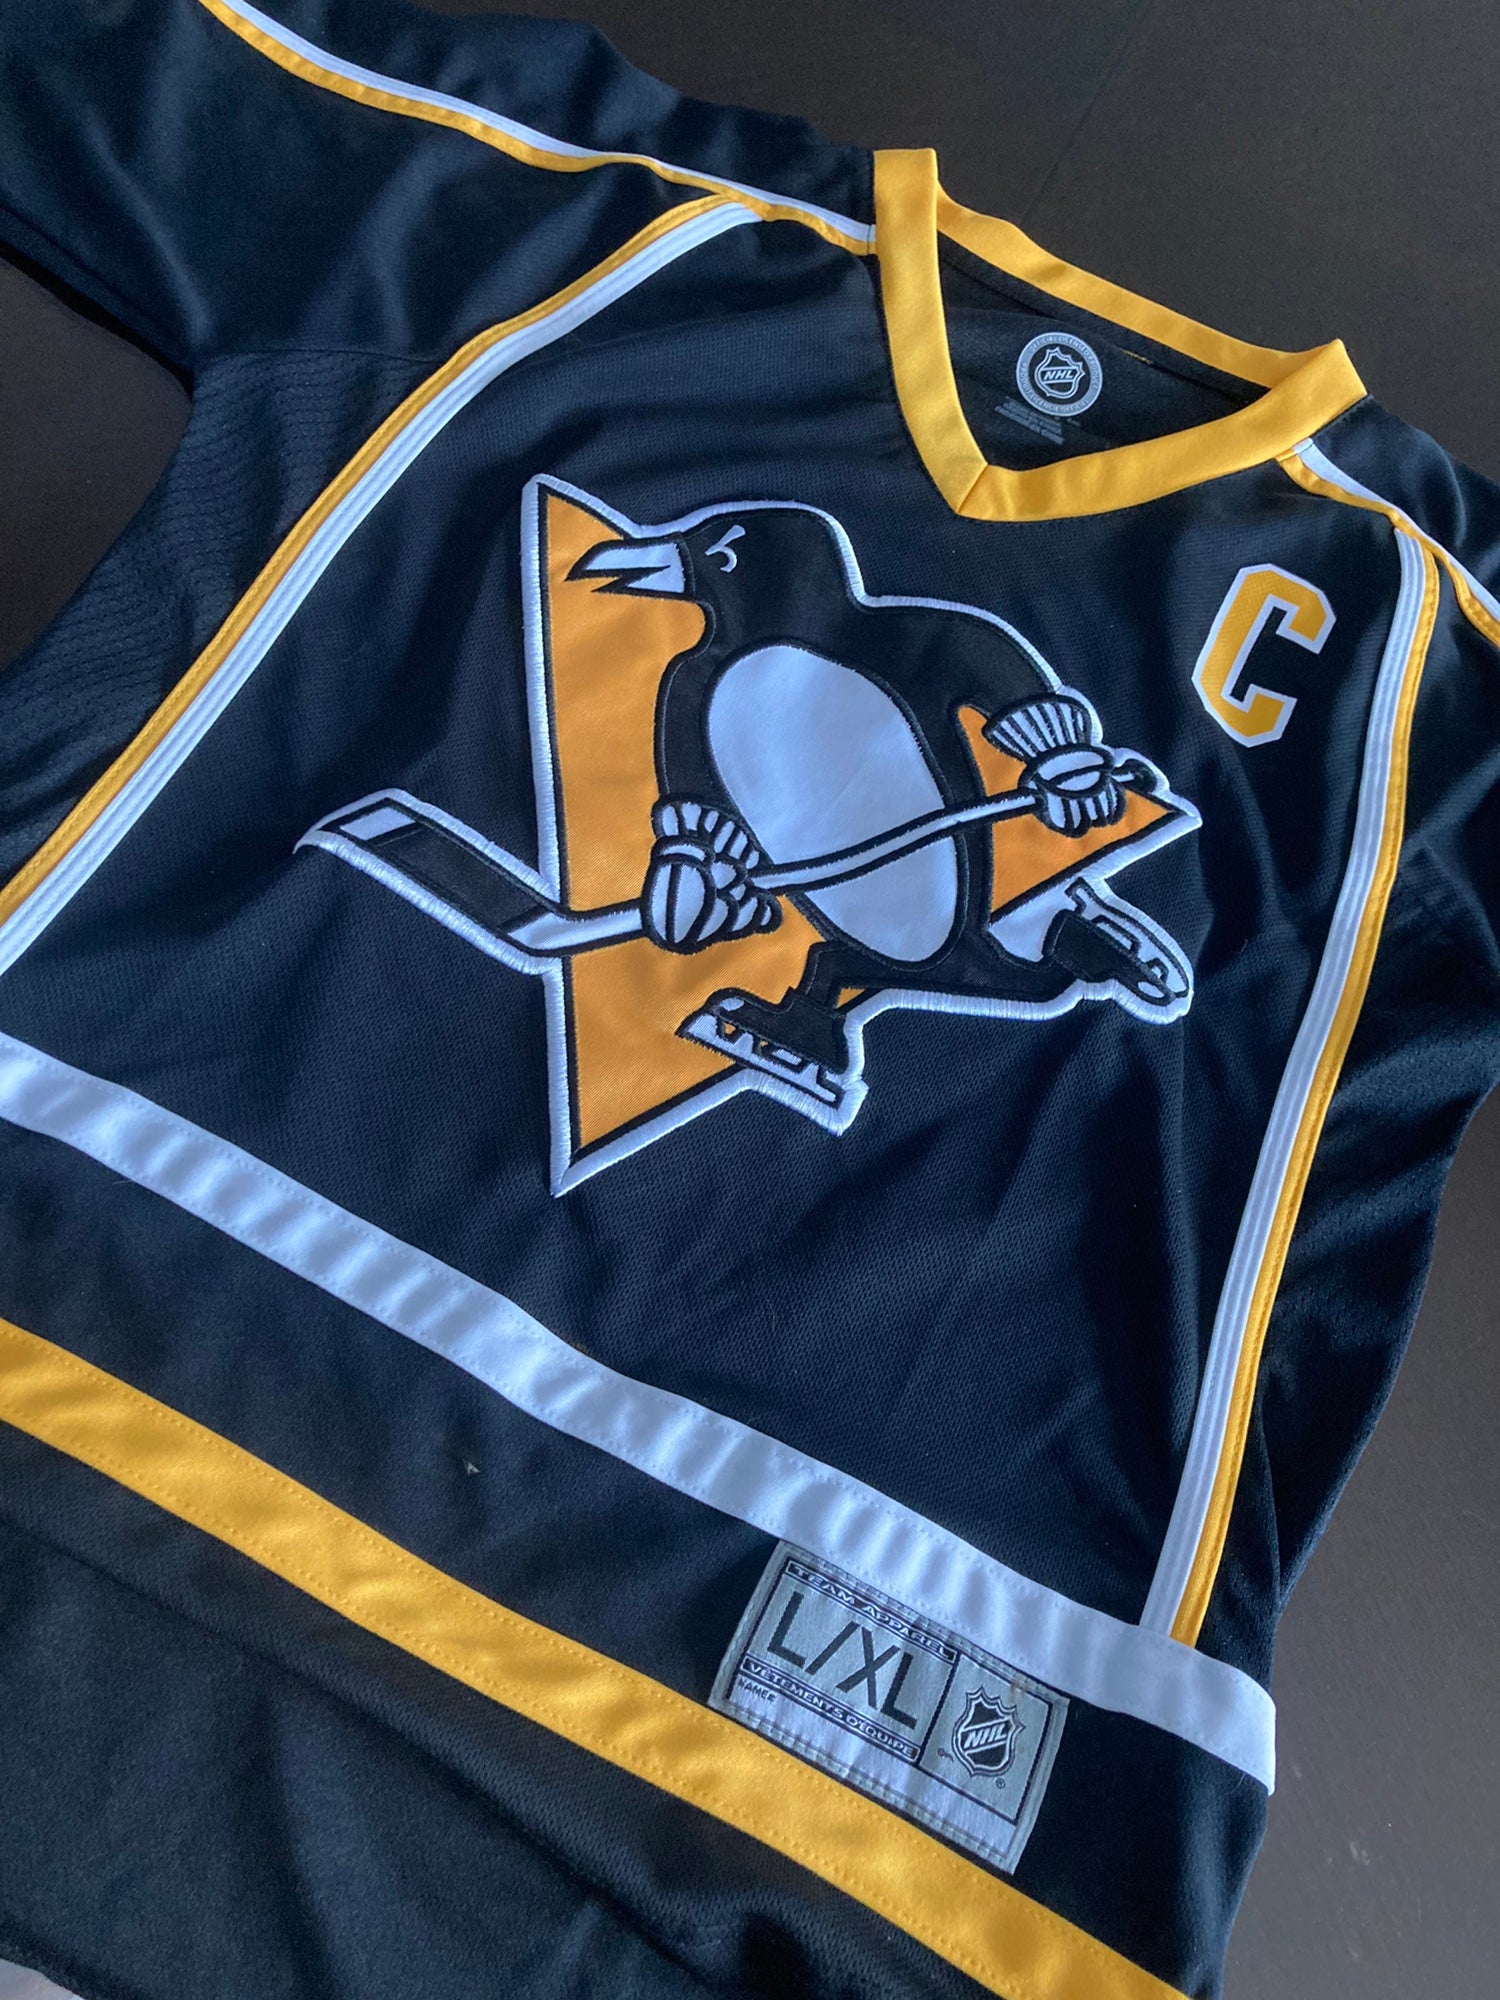 Crosby Pittsburg Penguins Game replica jersey